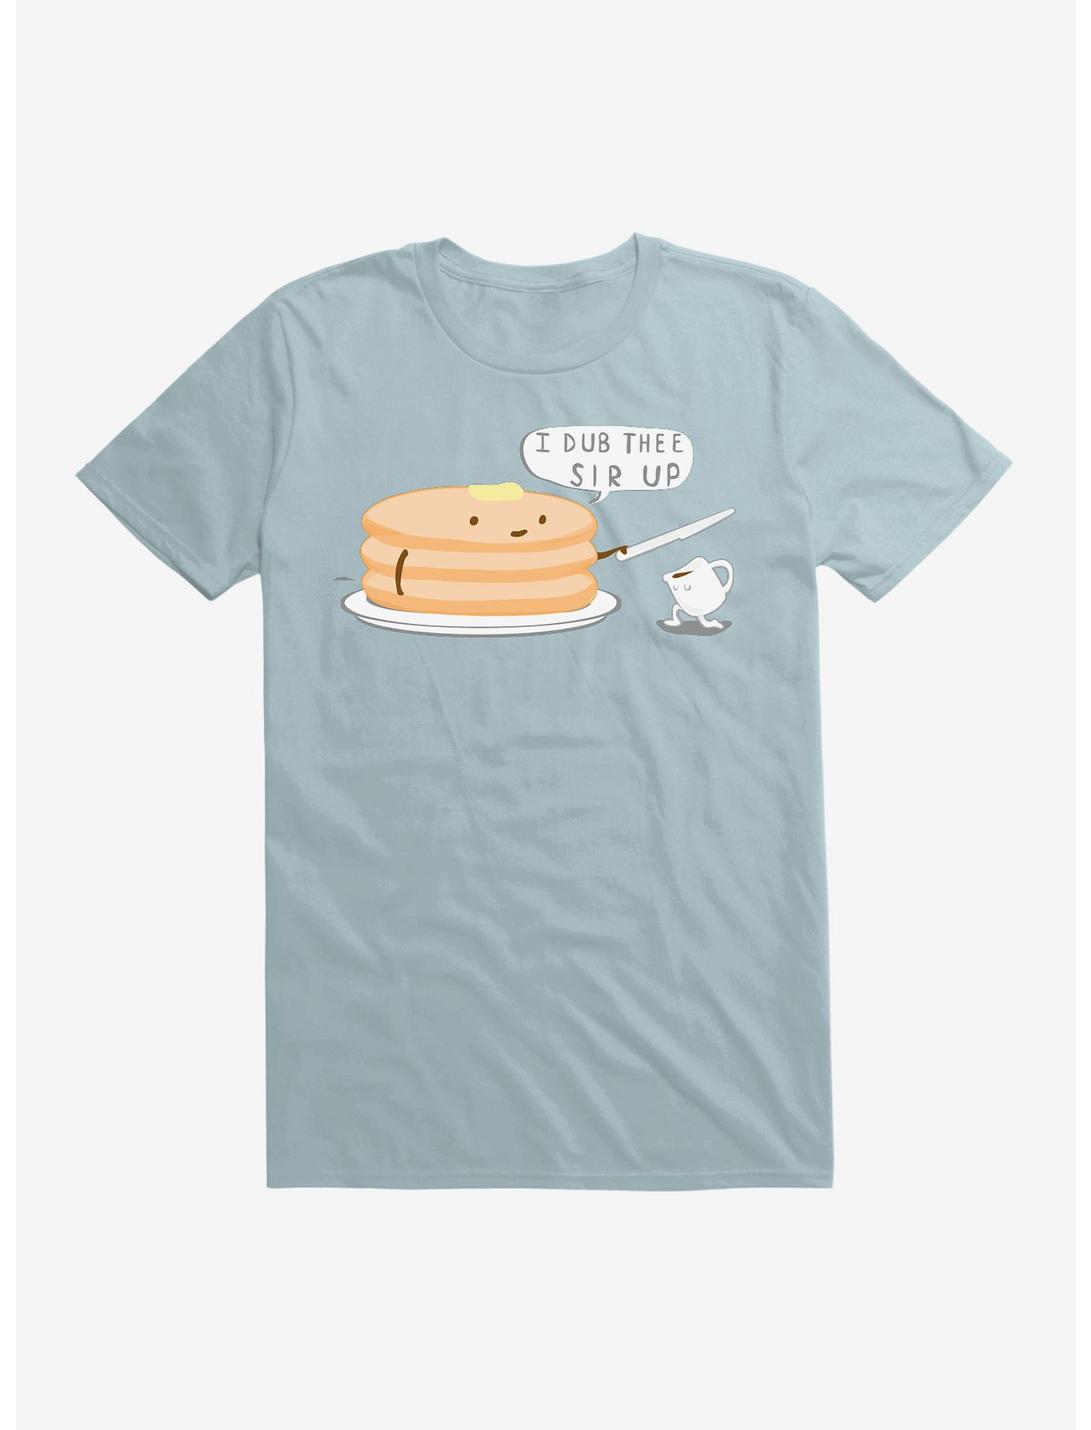 Knight Of The Breakfast Table! T-Shirt, LIGHT BLUE, hi-res